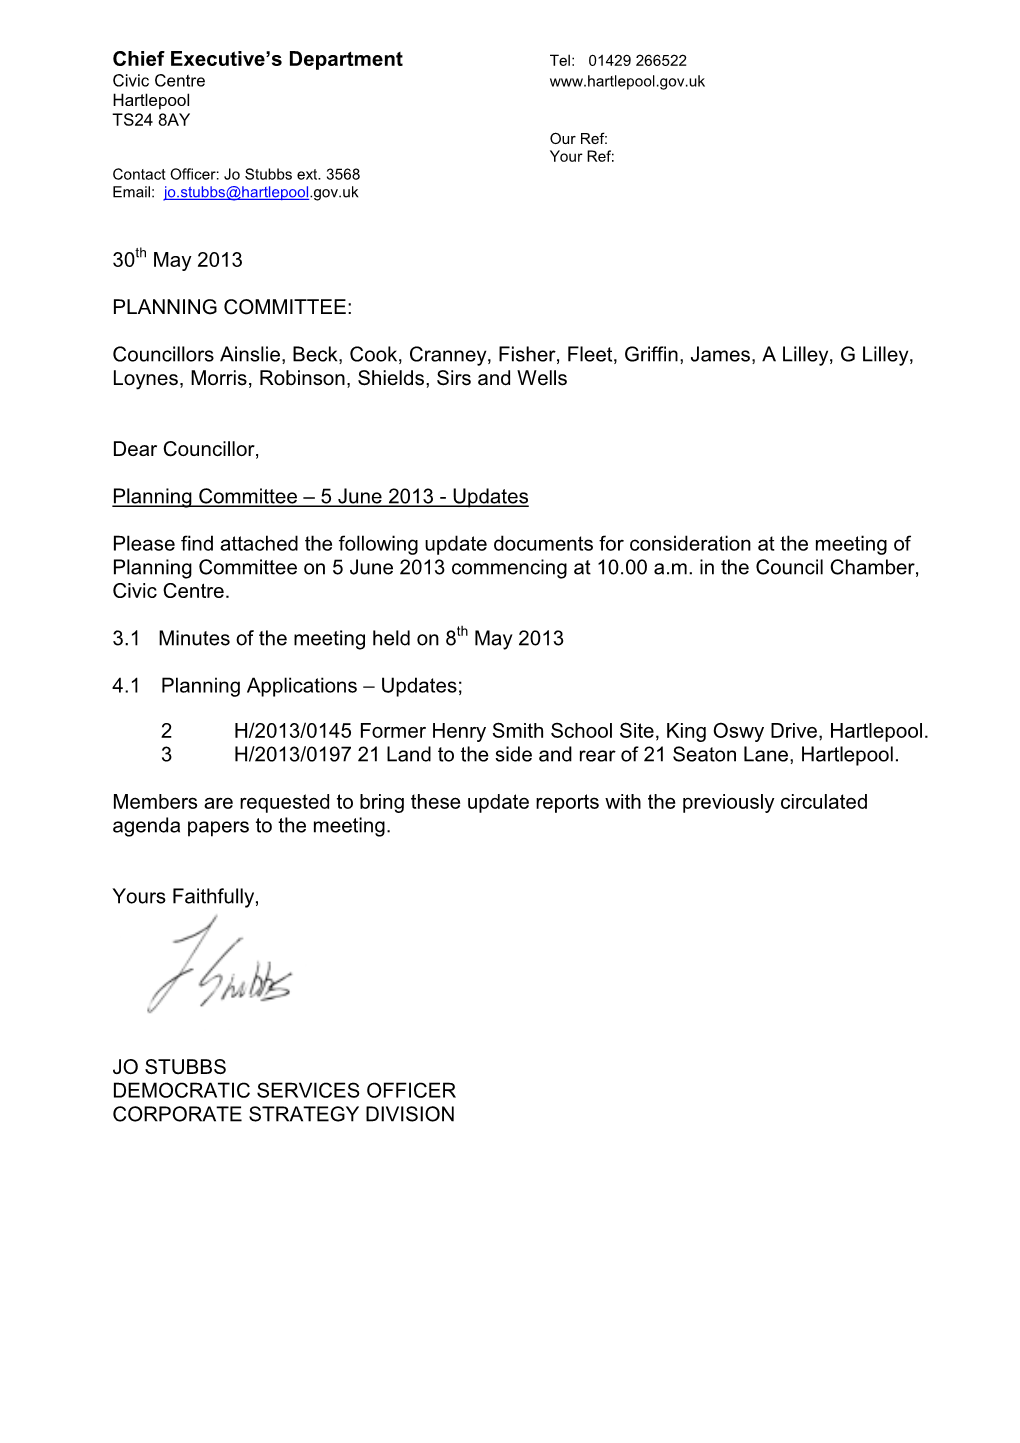 Chief Executive's Department 30 May 2013